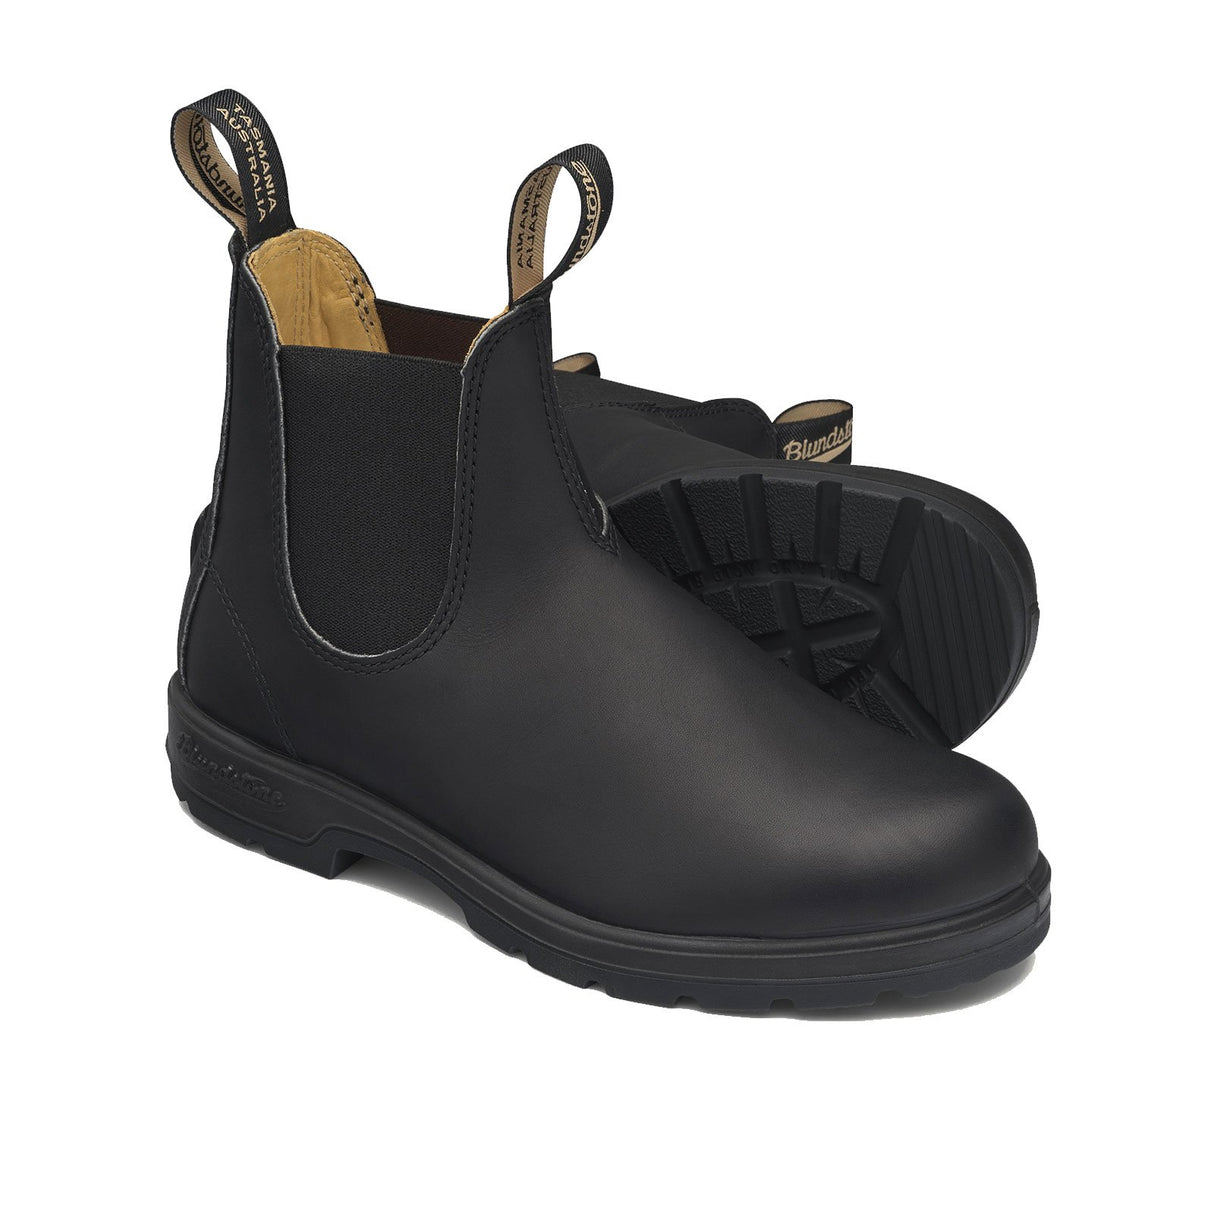 Blundstone Classic 558 Chelsea Boot (Unisex) - Black Boots - Casual - Mid - The Heel Shoe Fitters